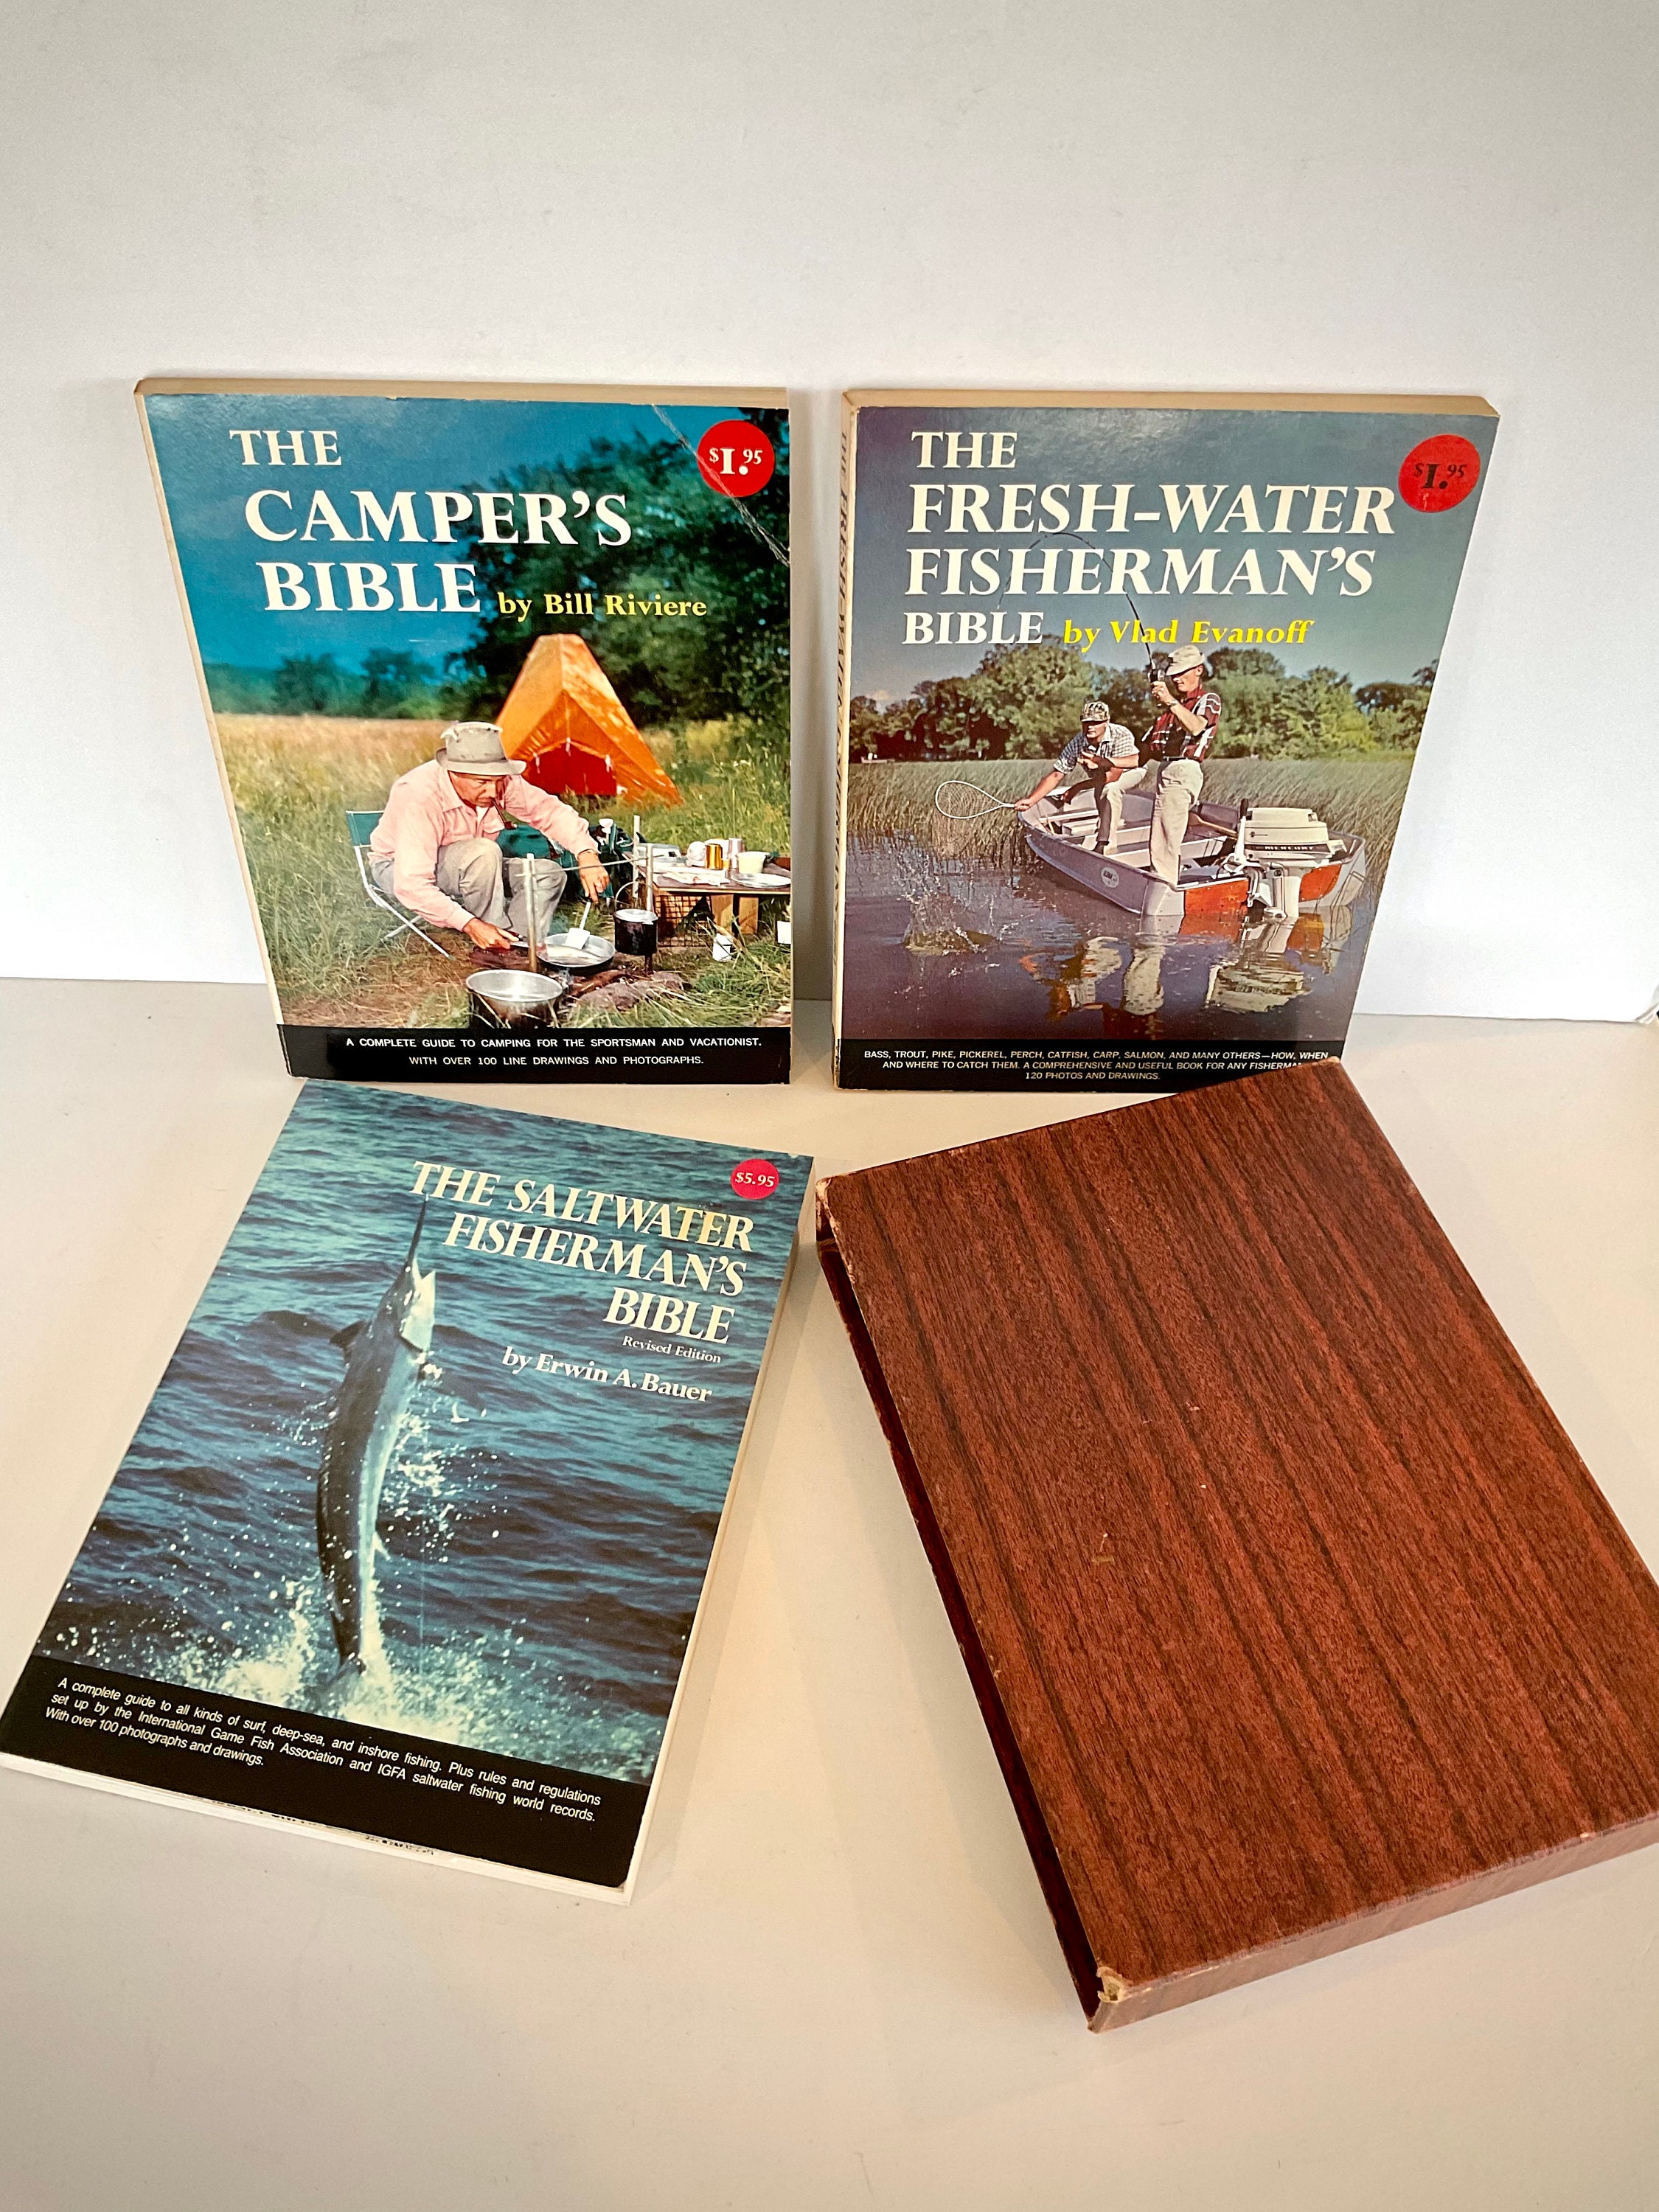 Vintage Doubleday Paperback Book Collection within a Wood Patterned  Cardboard Sleeve Box. Set of Three Camping and Fishing Books.